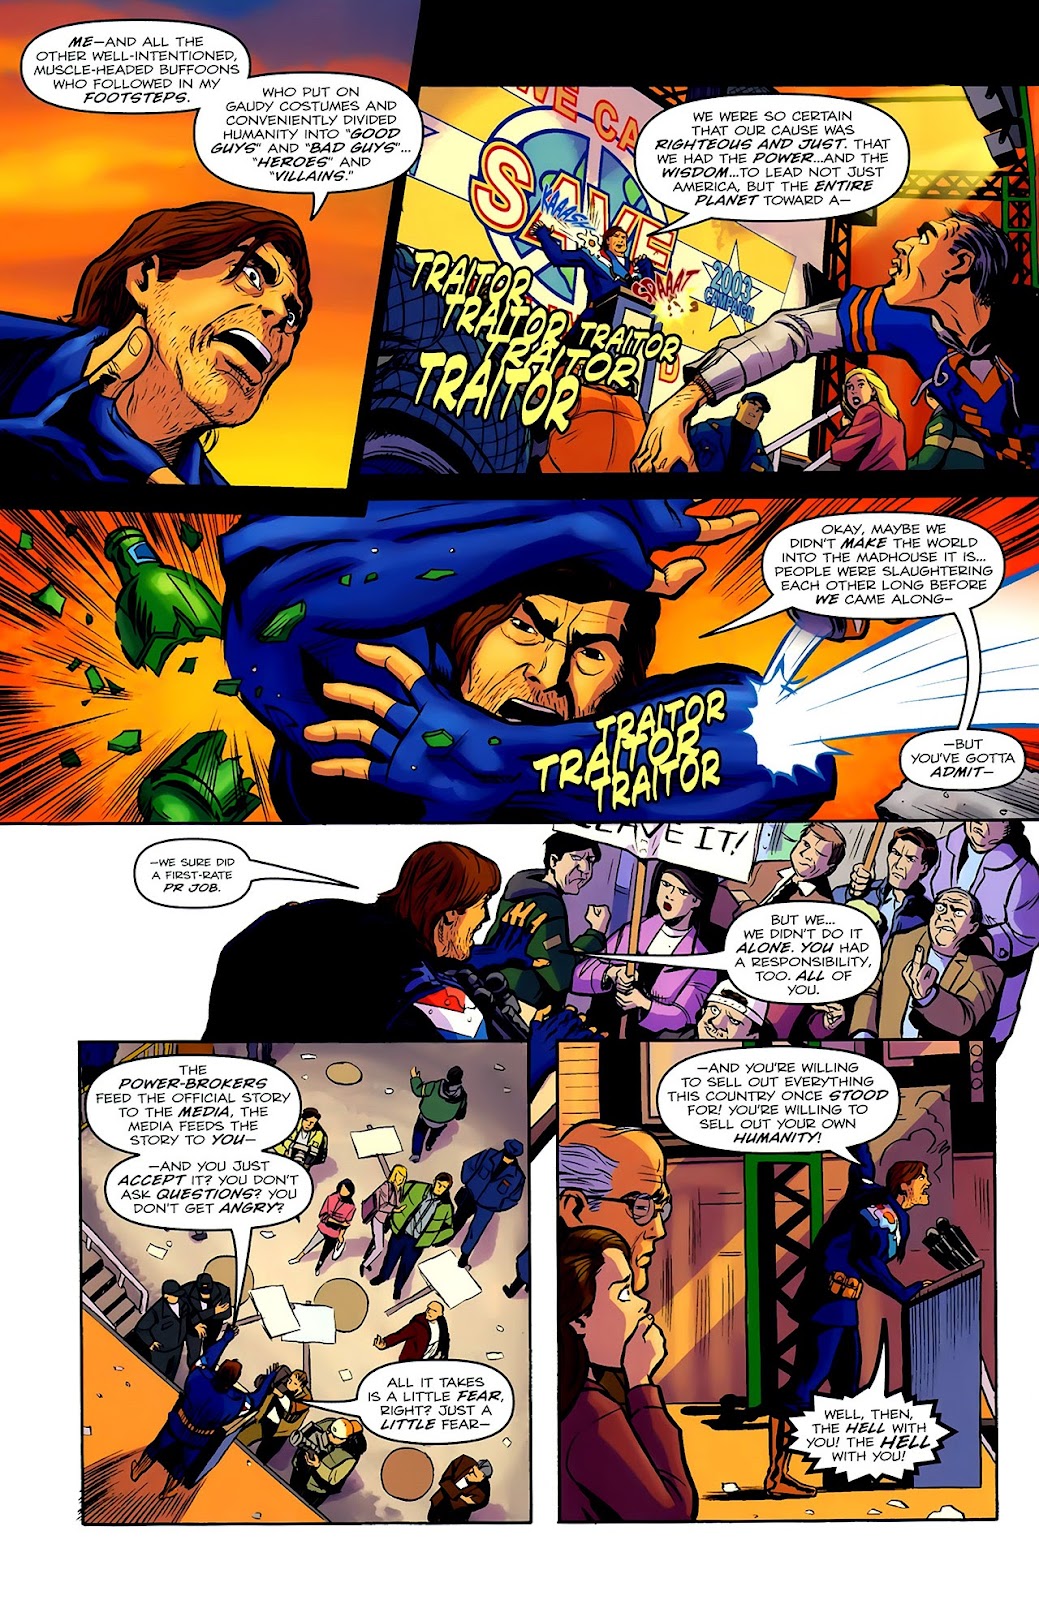 The Life and Times of Savior 28 issue 1 - Page 12